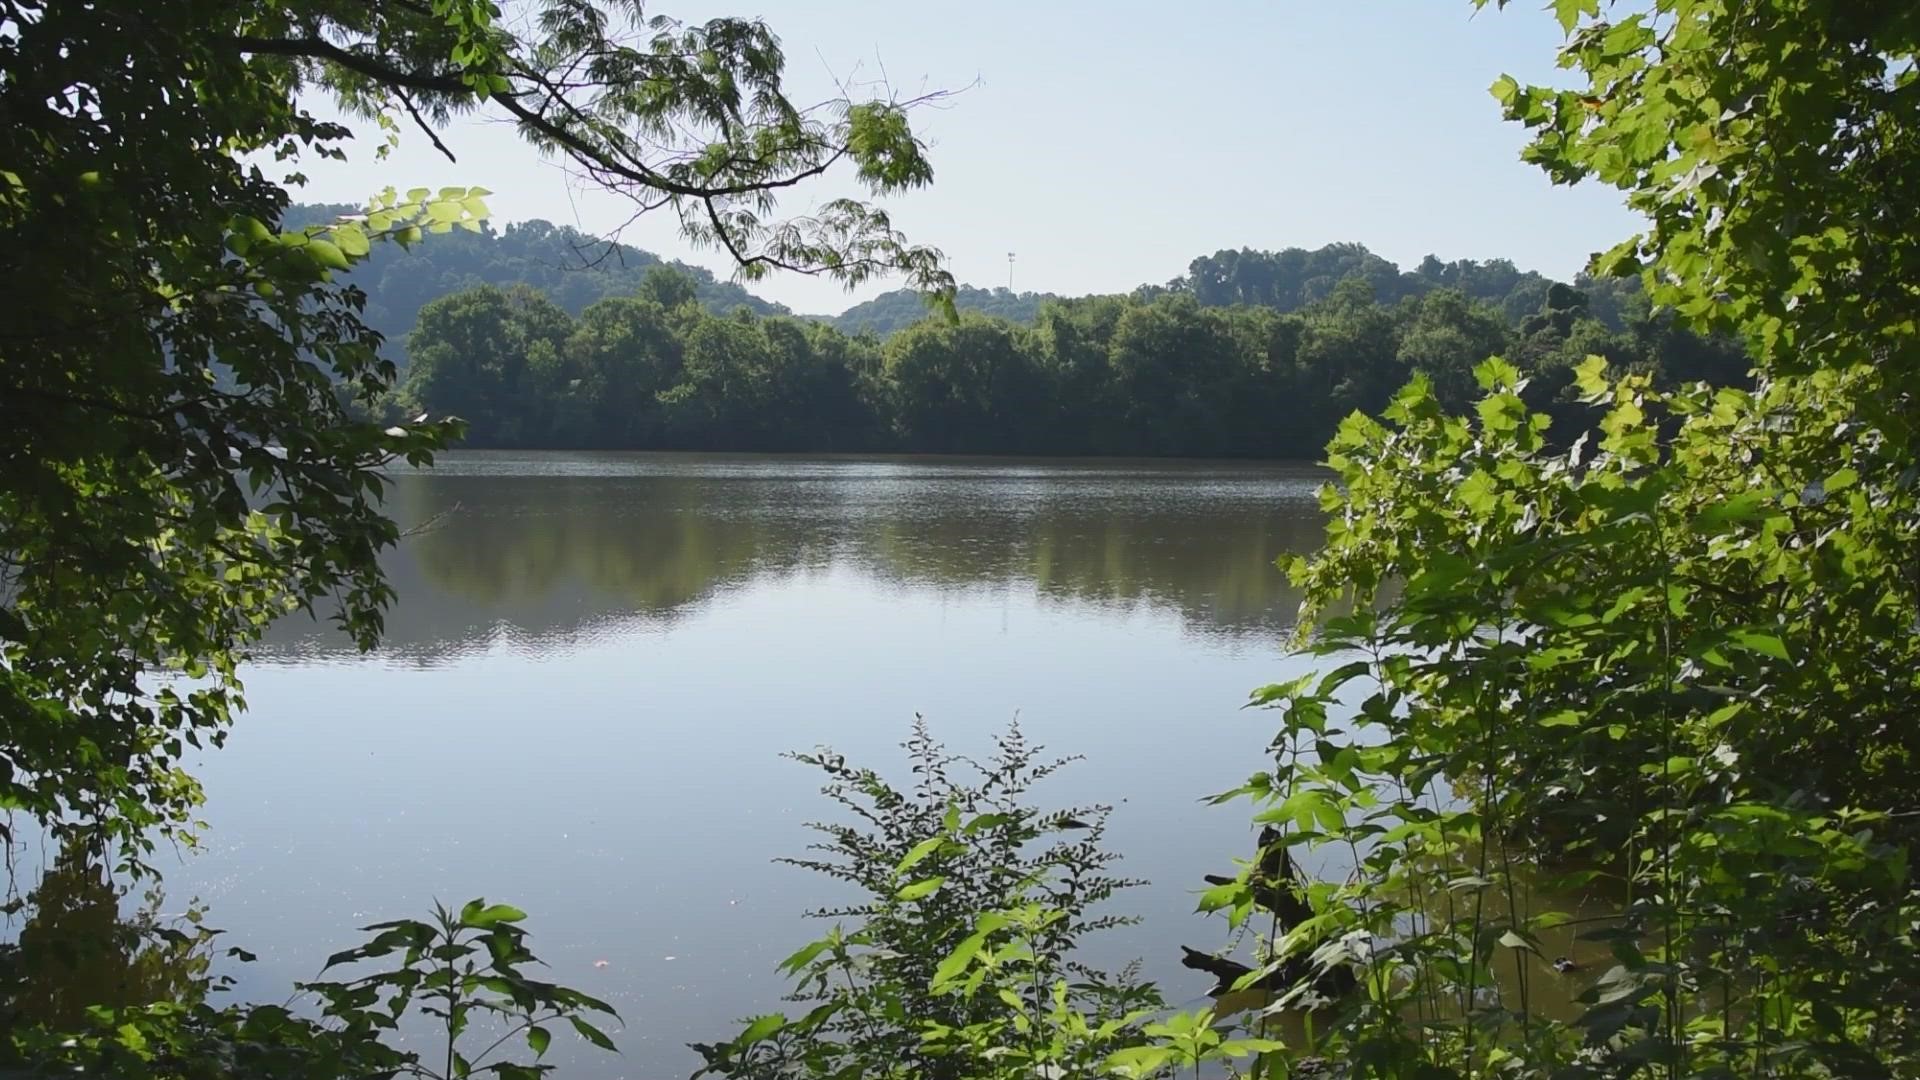 Need a place to take a walk, have a picnic, launch a boat or play fetch with your dog? You could try this West Knoxville spot.